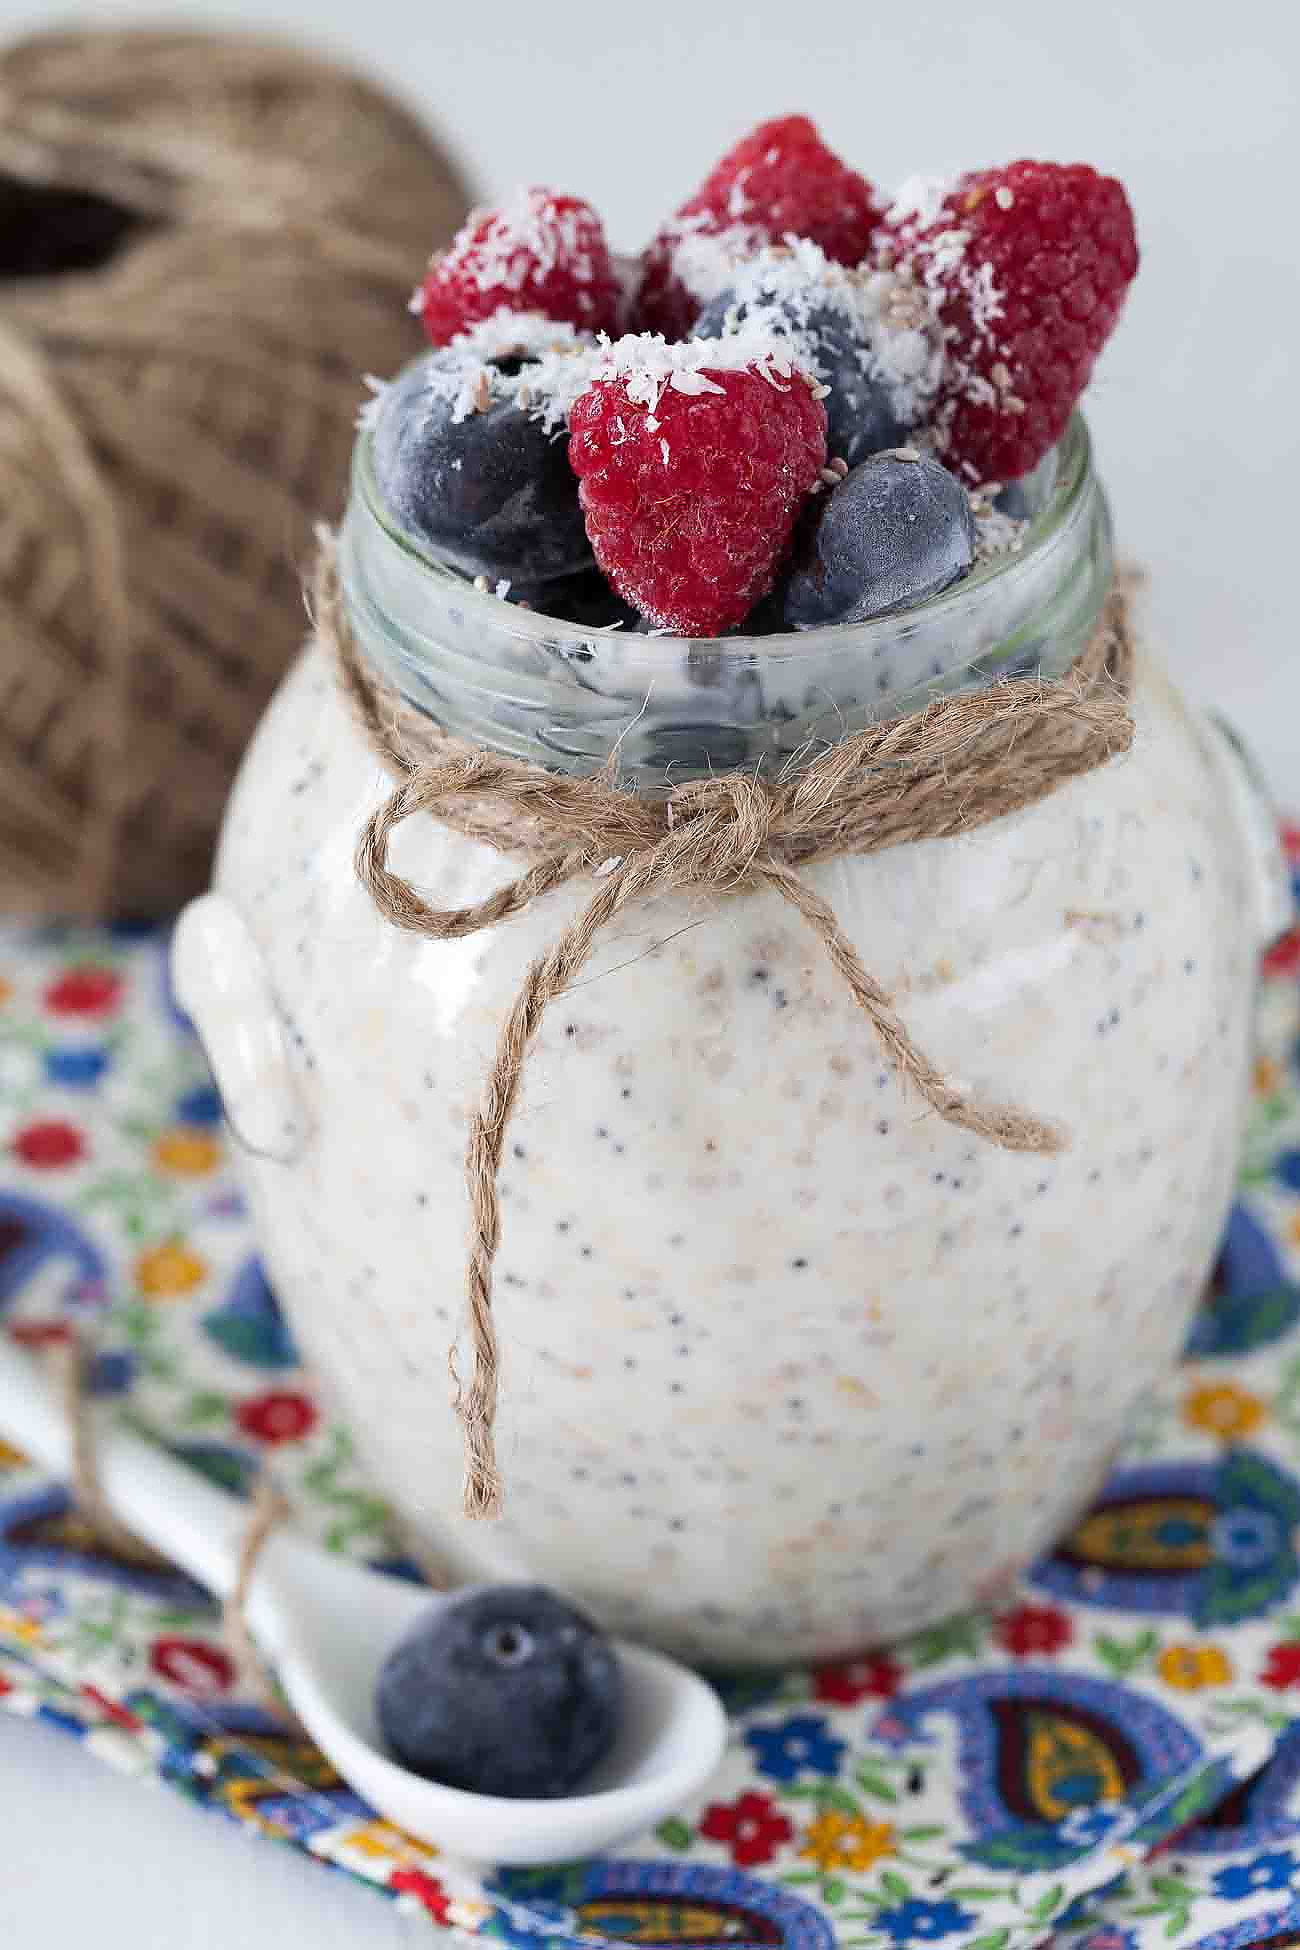 Overnight Oats Recipe (No Cook Blueberry Vanilla and Chia seeds Oatmeal)